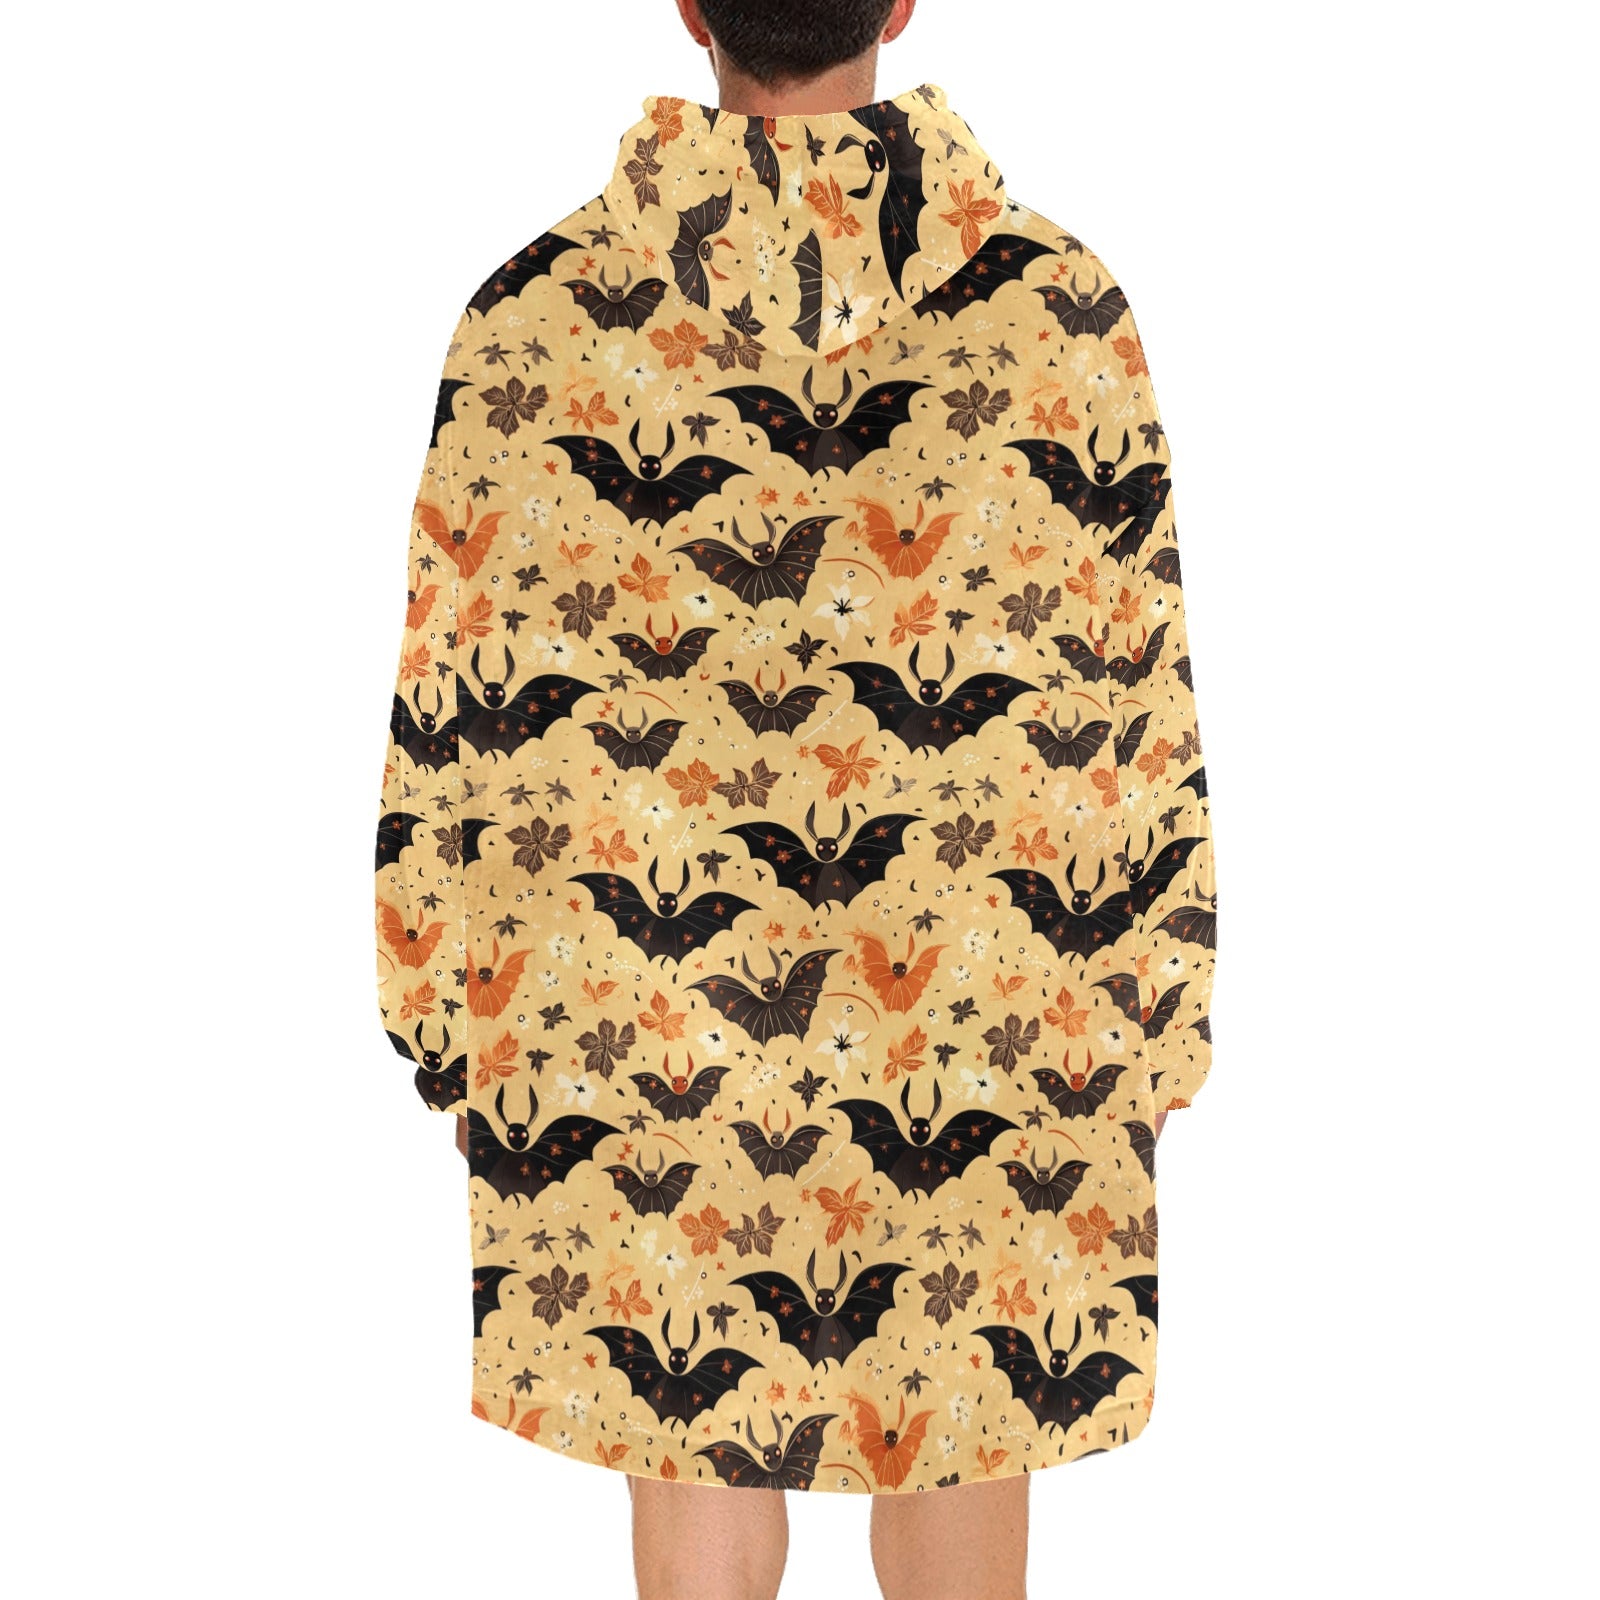 Embrace the Halloween season with our bat print hooded fleece warm blanket, offering comfort and style during eerie movie nights